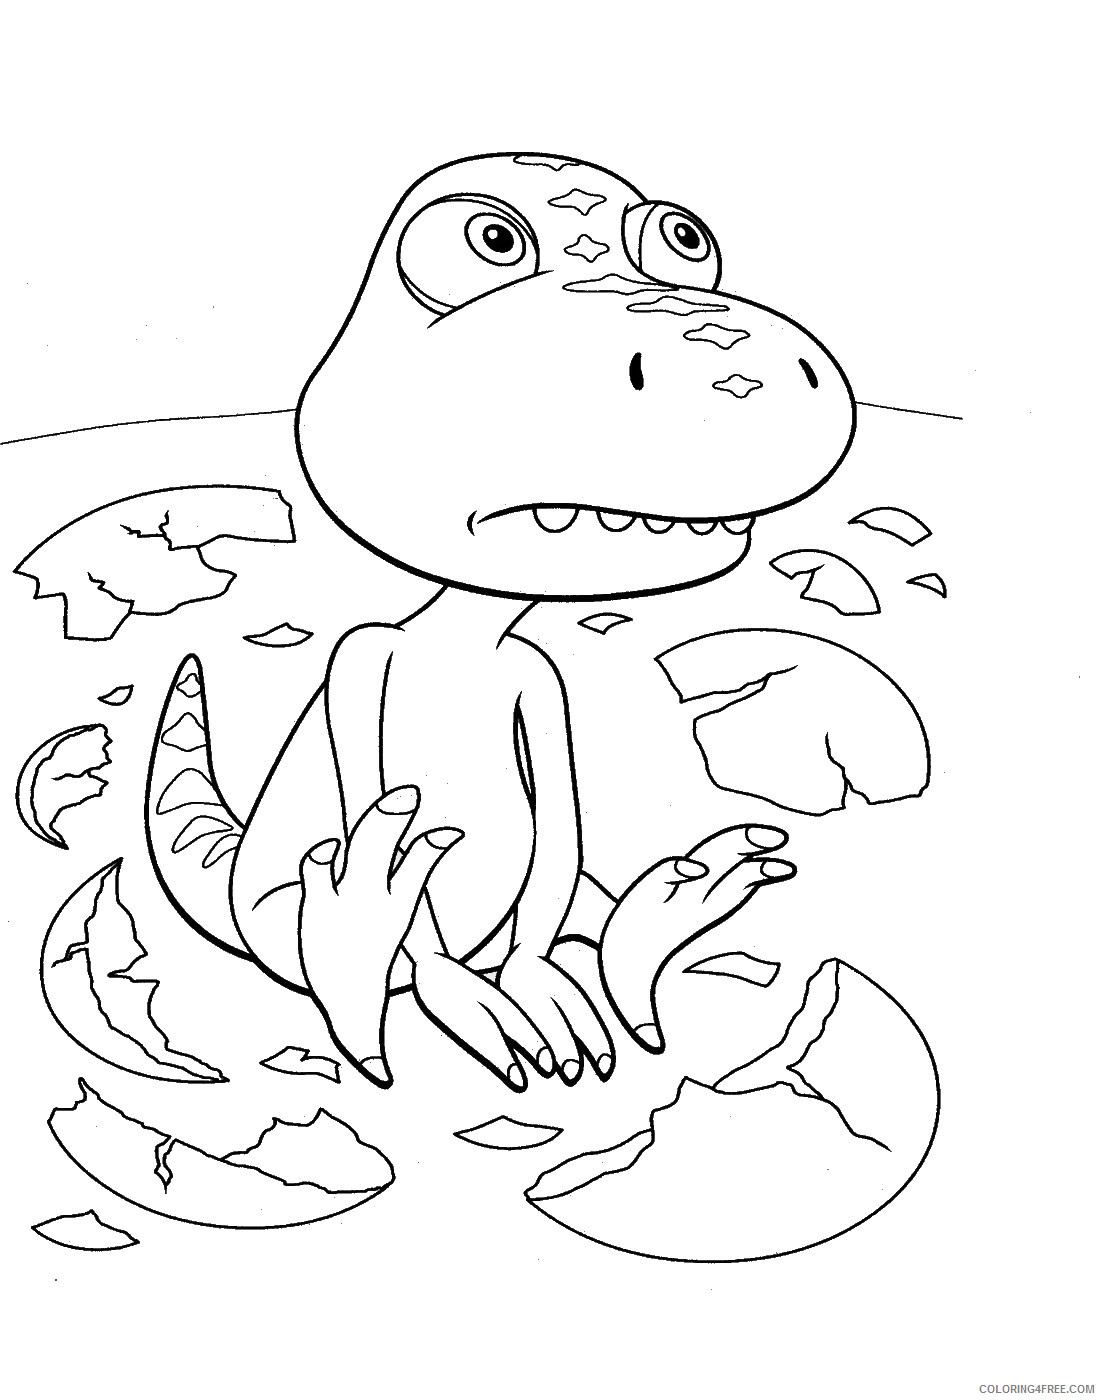 Dinosaur Train Coloring Pages Cartoons dino_train_cl_01 Printable 2020 2222 Coloring4free